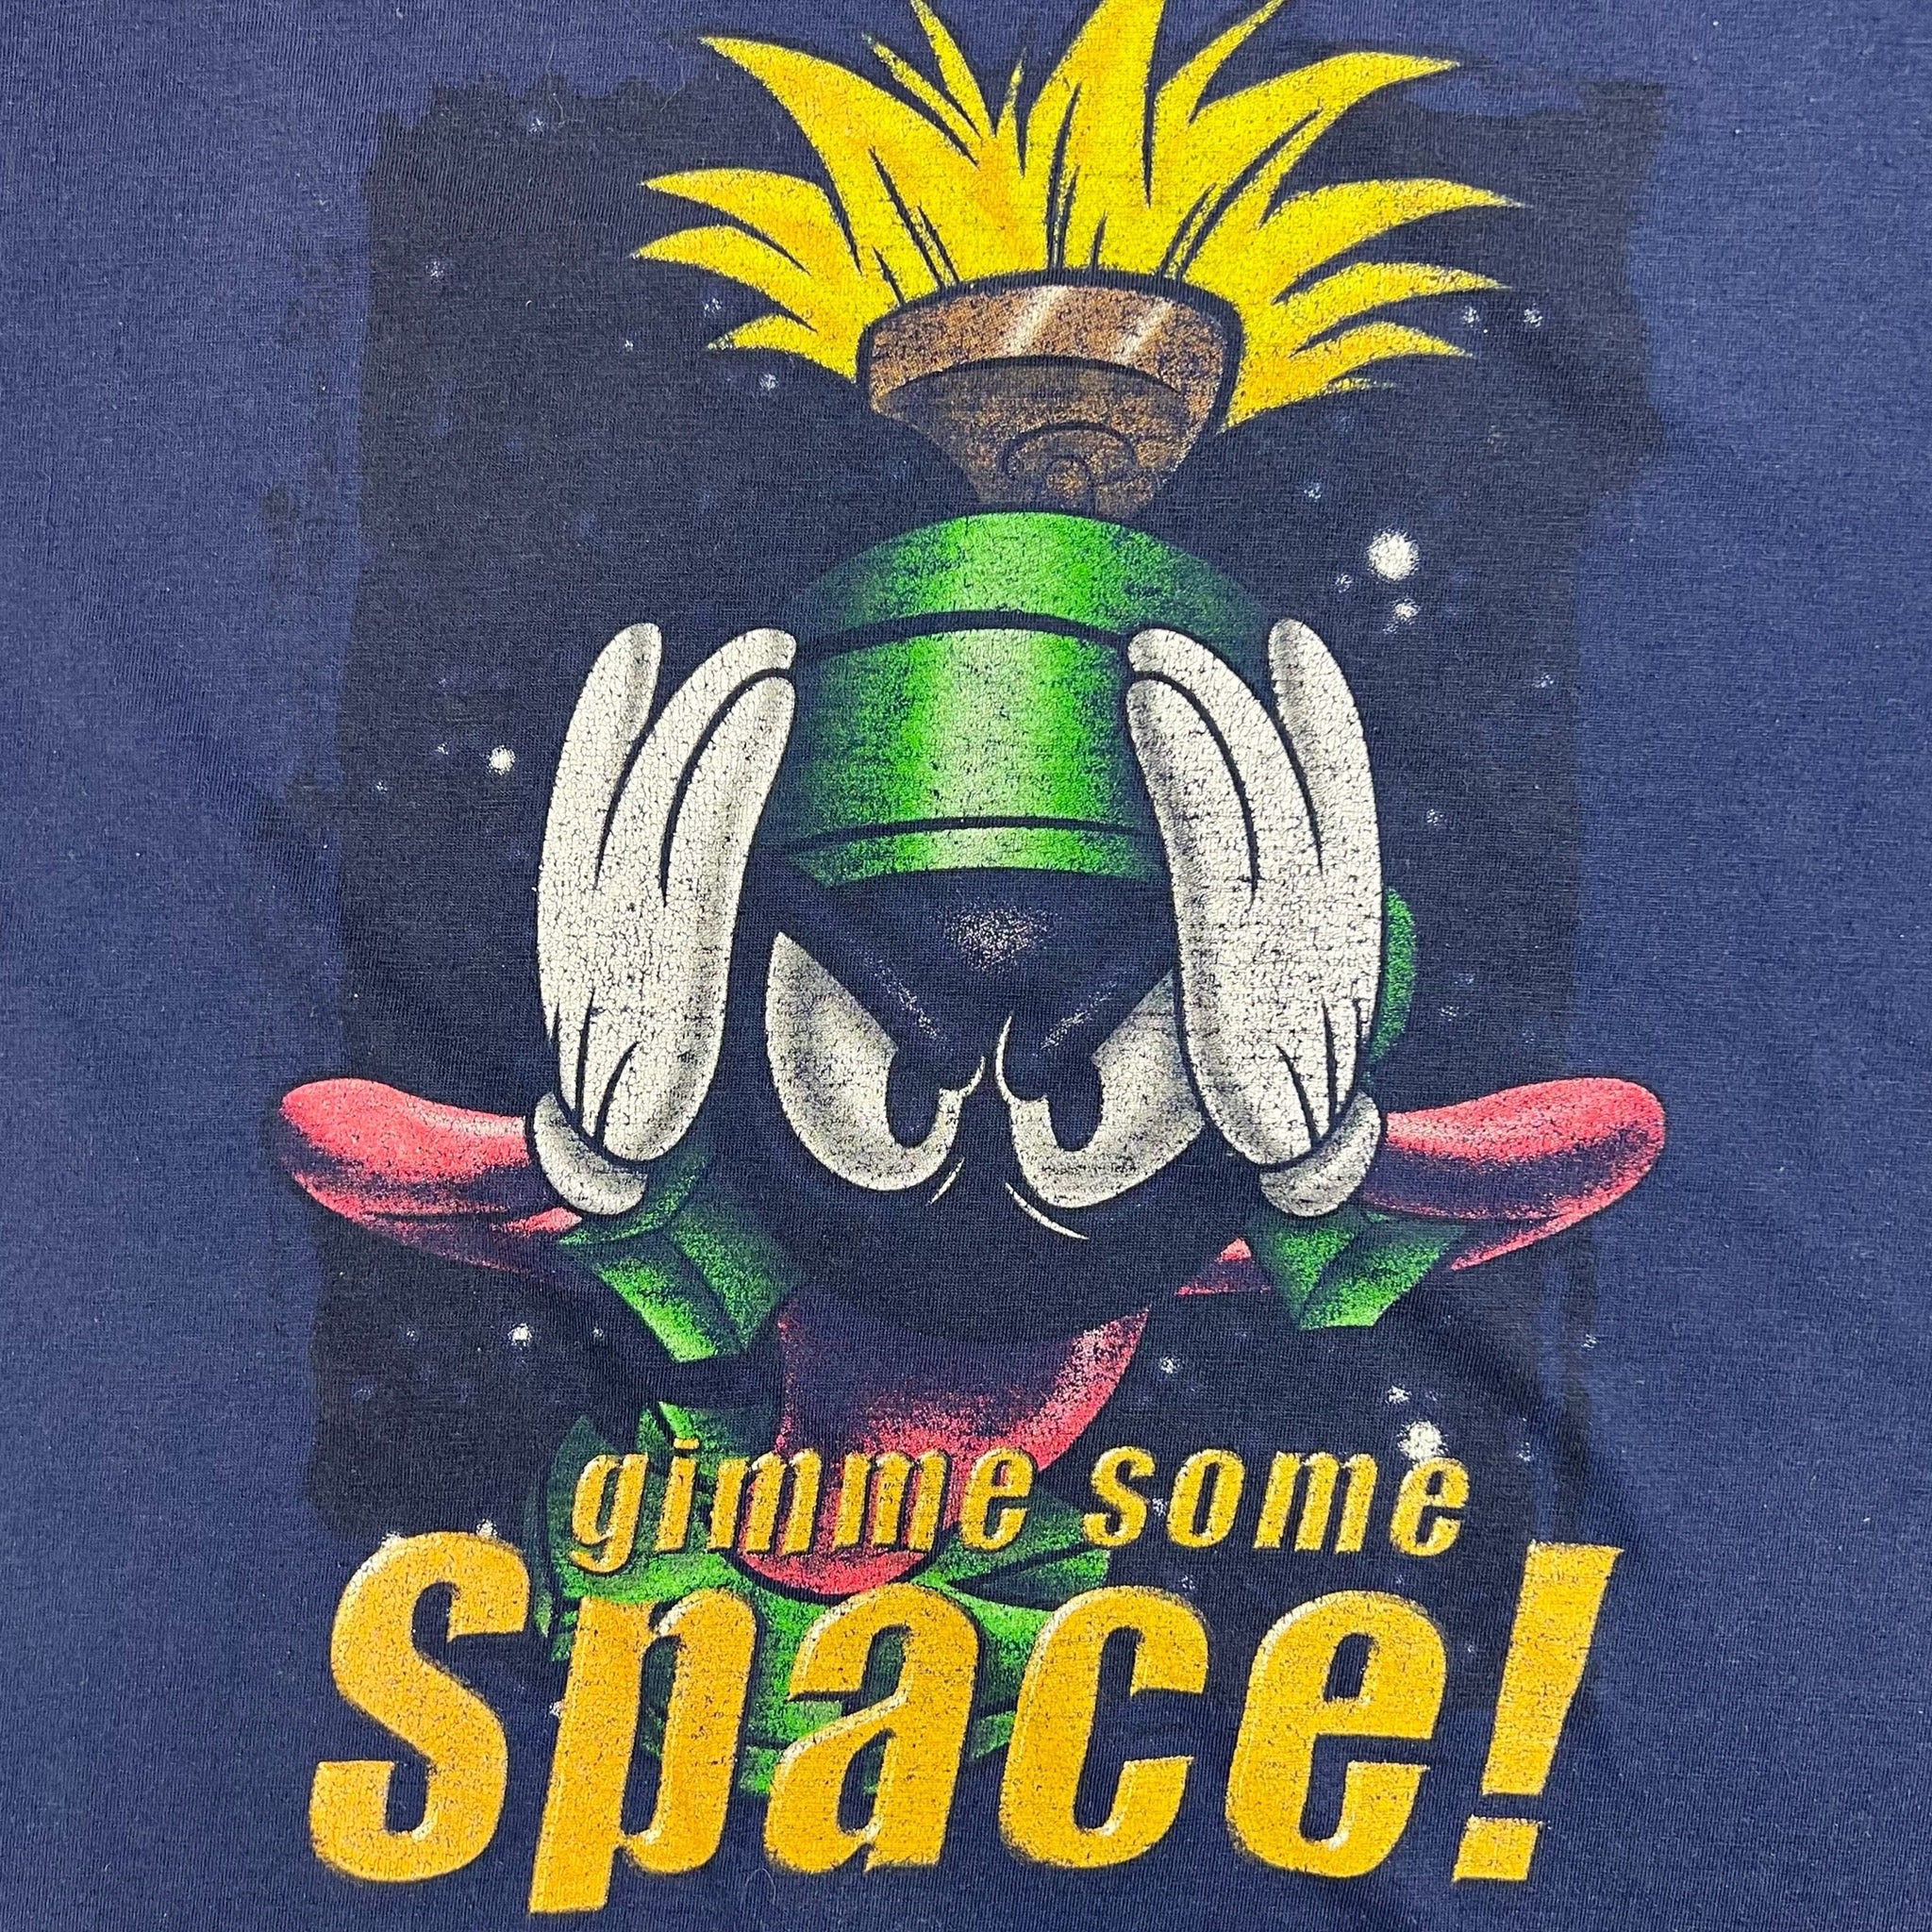 Vintage Marvin The Martian “Gimmie Some Space” Tee